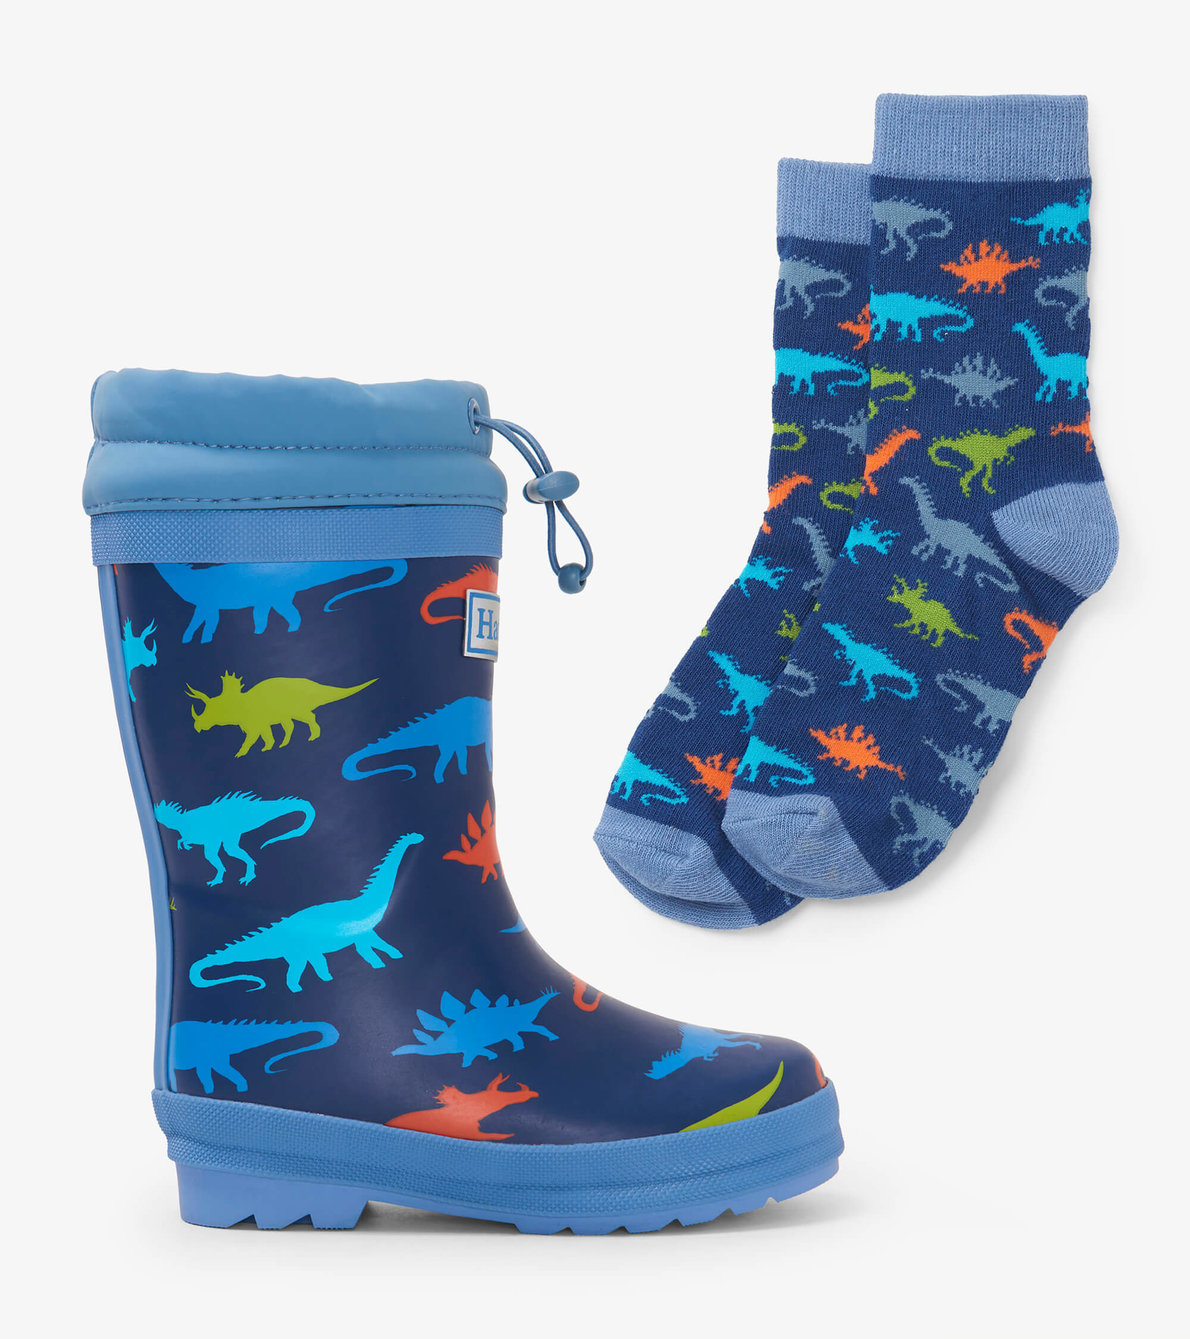 View larger image of Dinosaur Silhouettes Sherpa Lined Kids Rain Boots